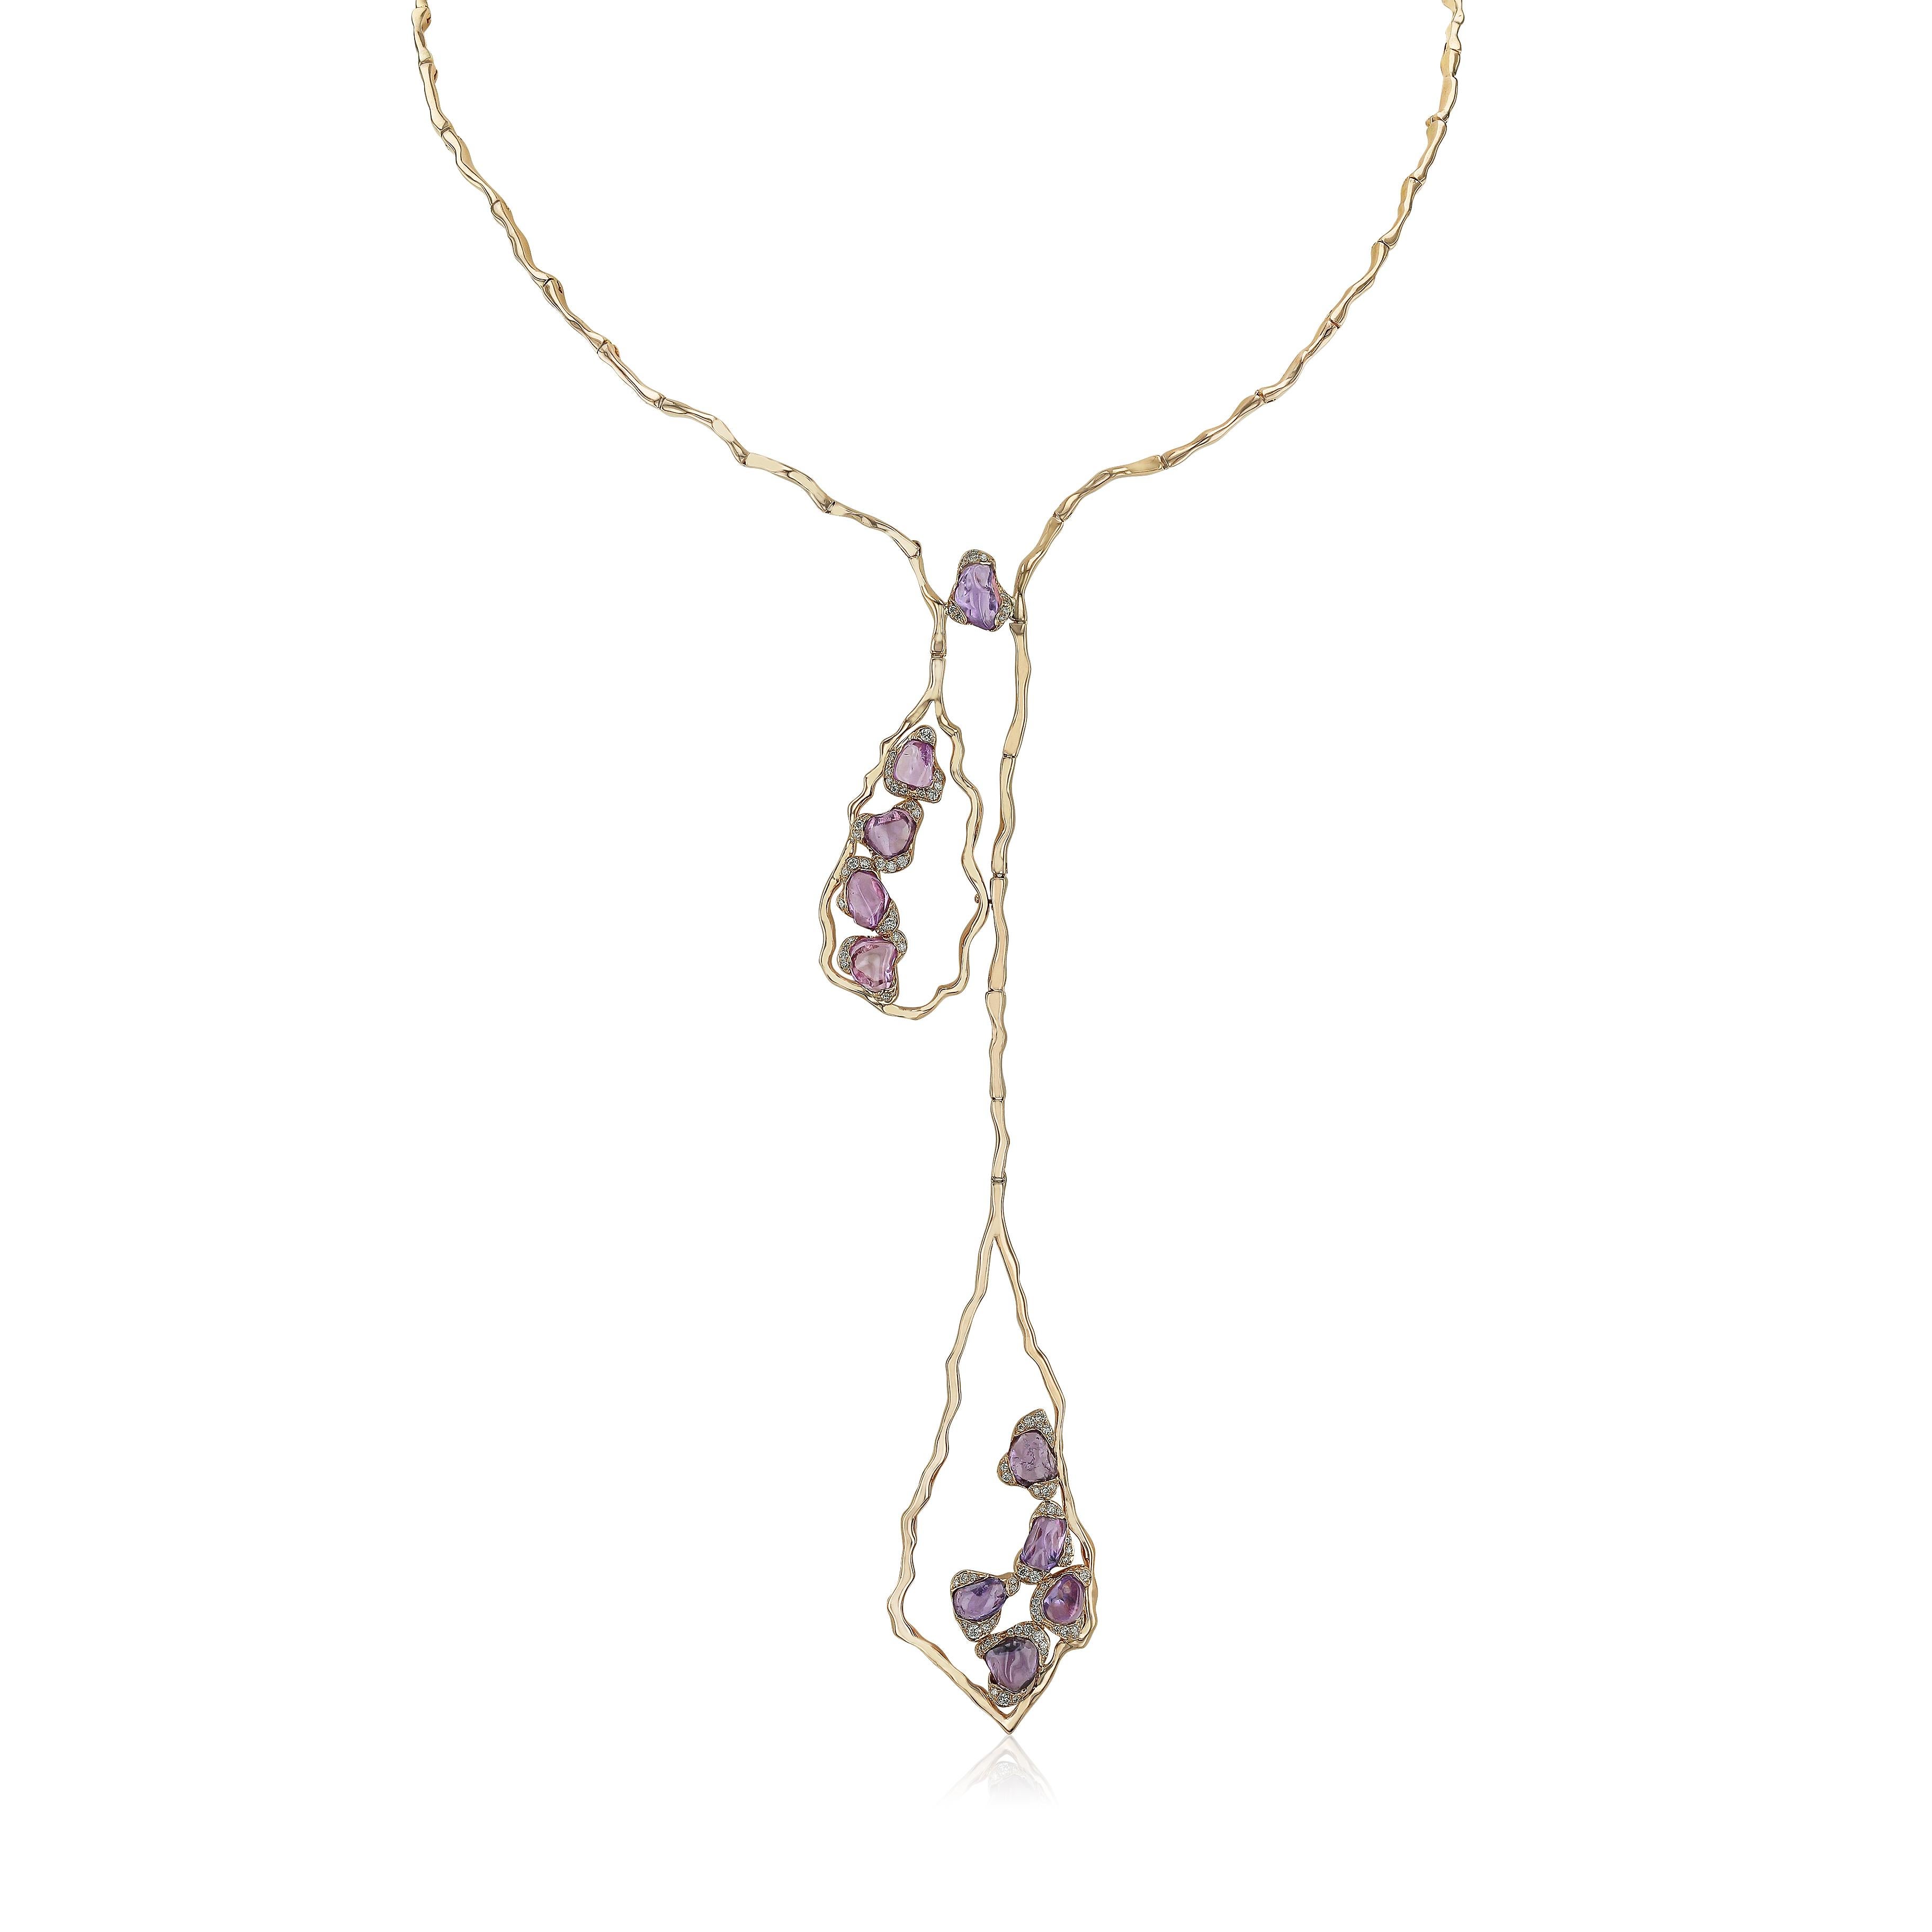 Set in the finest 18-karat rose gold, this asymmetrical necklace is designed in a very natural way showing its organic lines and beauty. It comes with 2 pendants: one big and one small to give an glamorous look for every occasion.   Diamonds(Total